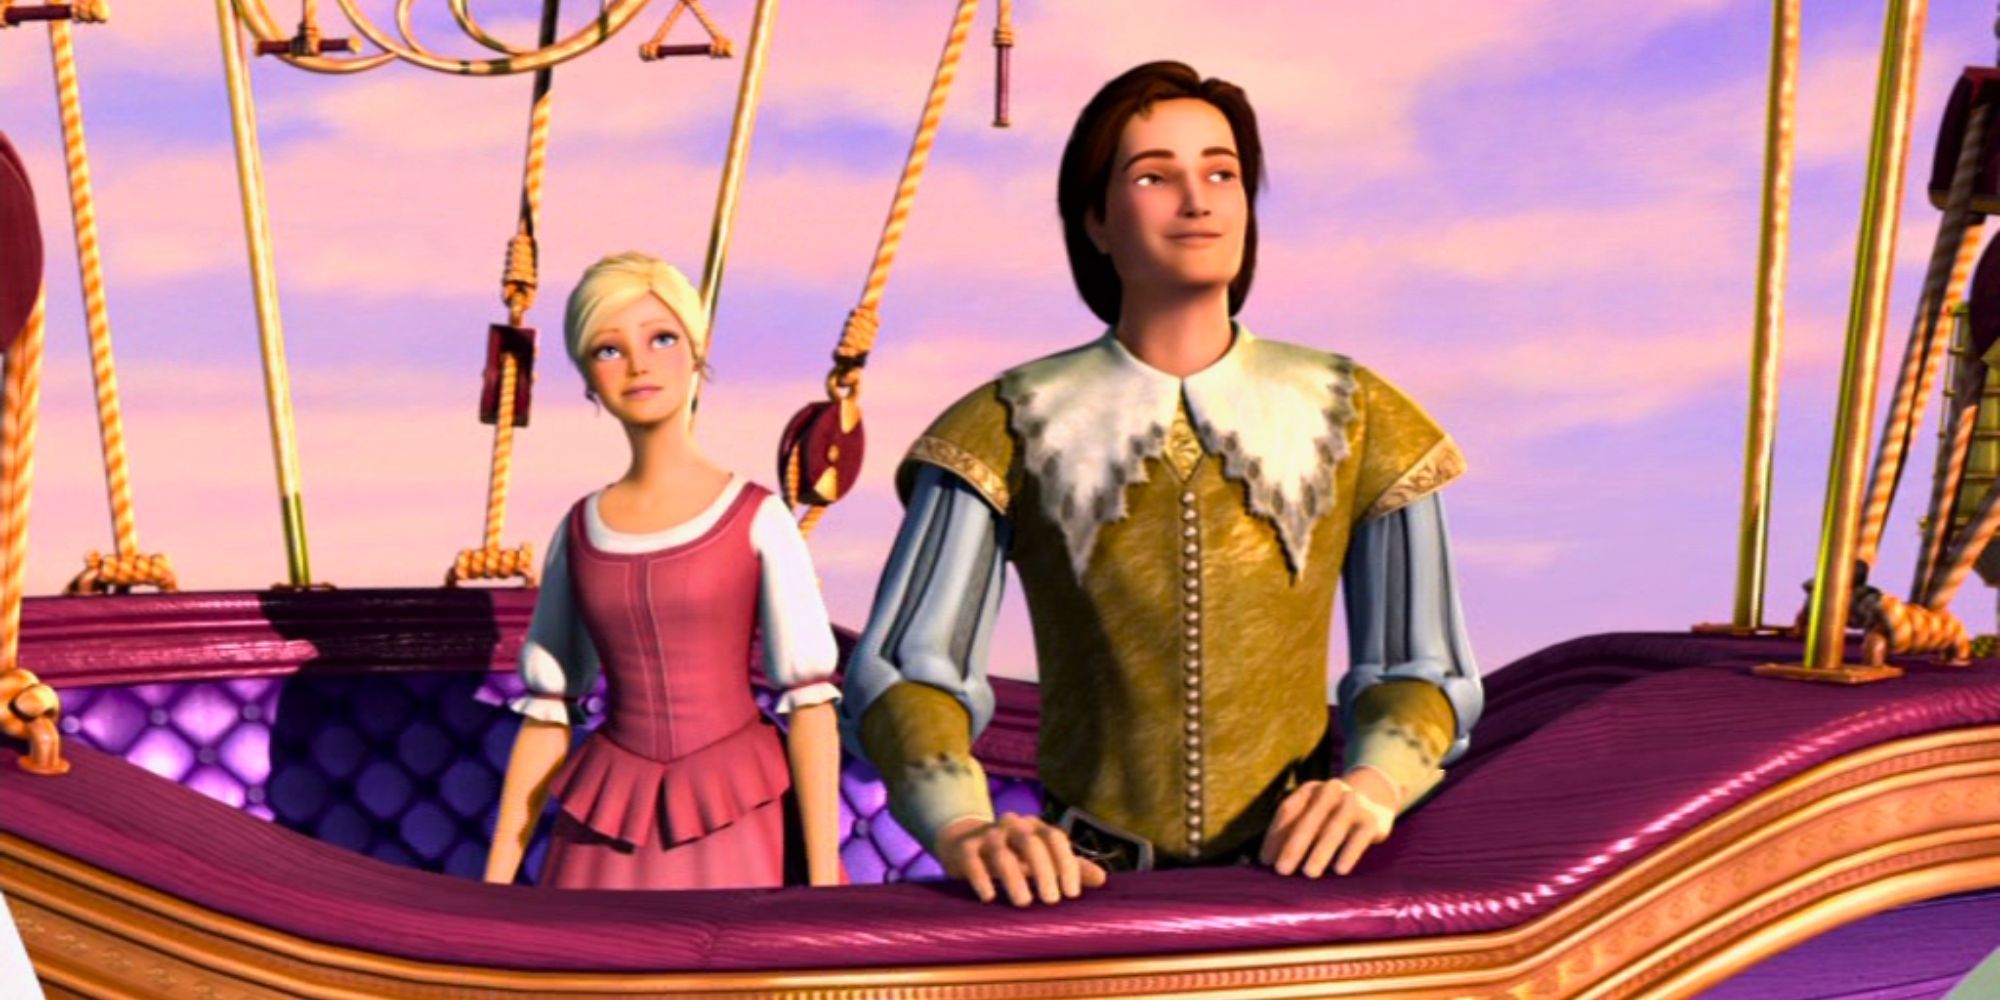 Prince Louis in his hot air balloon with Corinne from Barbie and the Three Musketeers